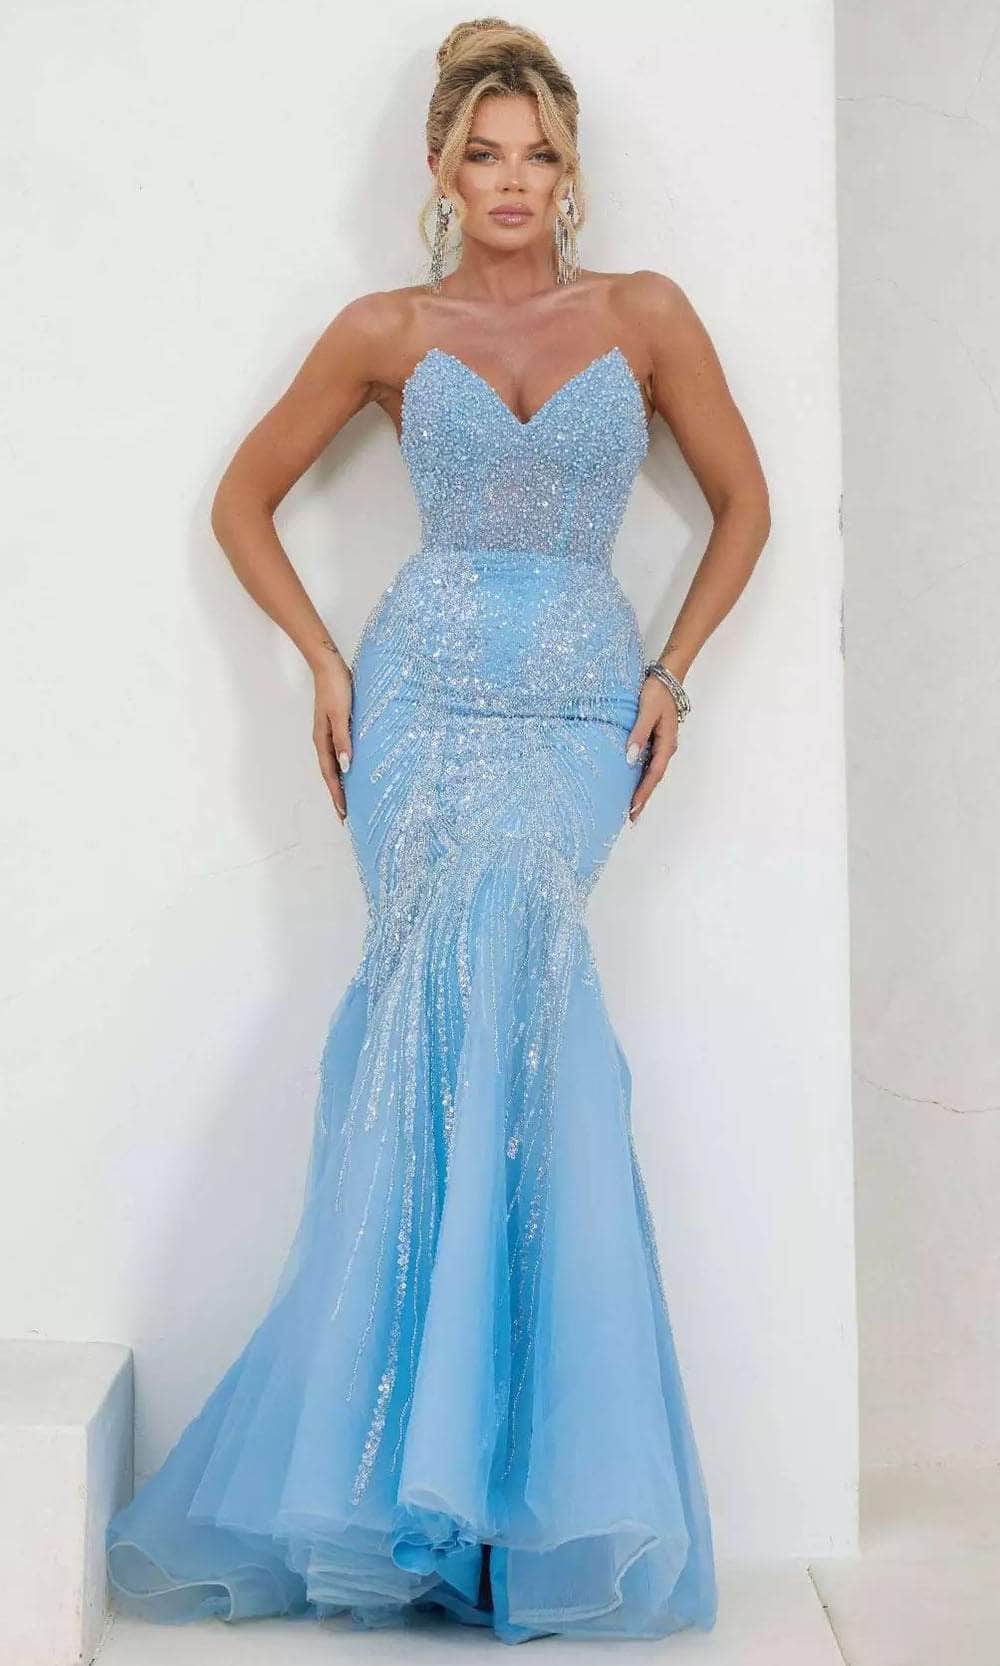 Image of Terani Couture 241P2171 - Bead Sequin Prom Dress